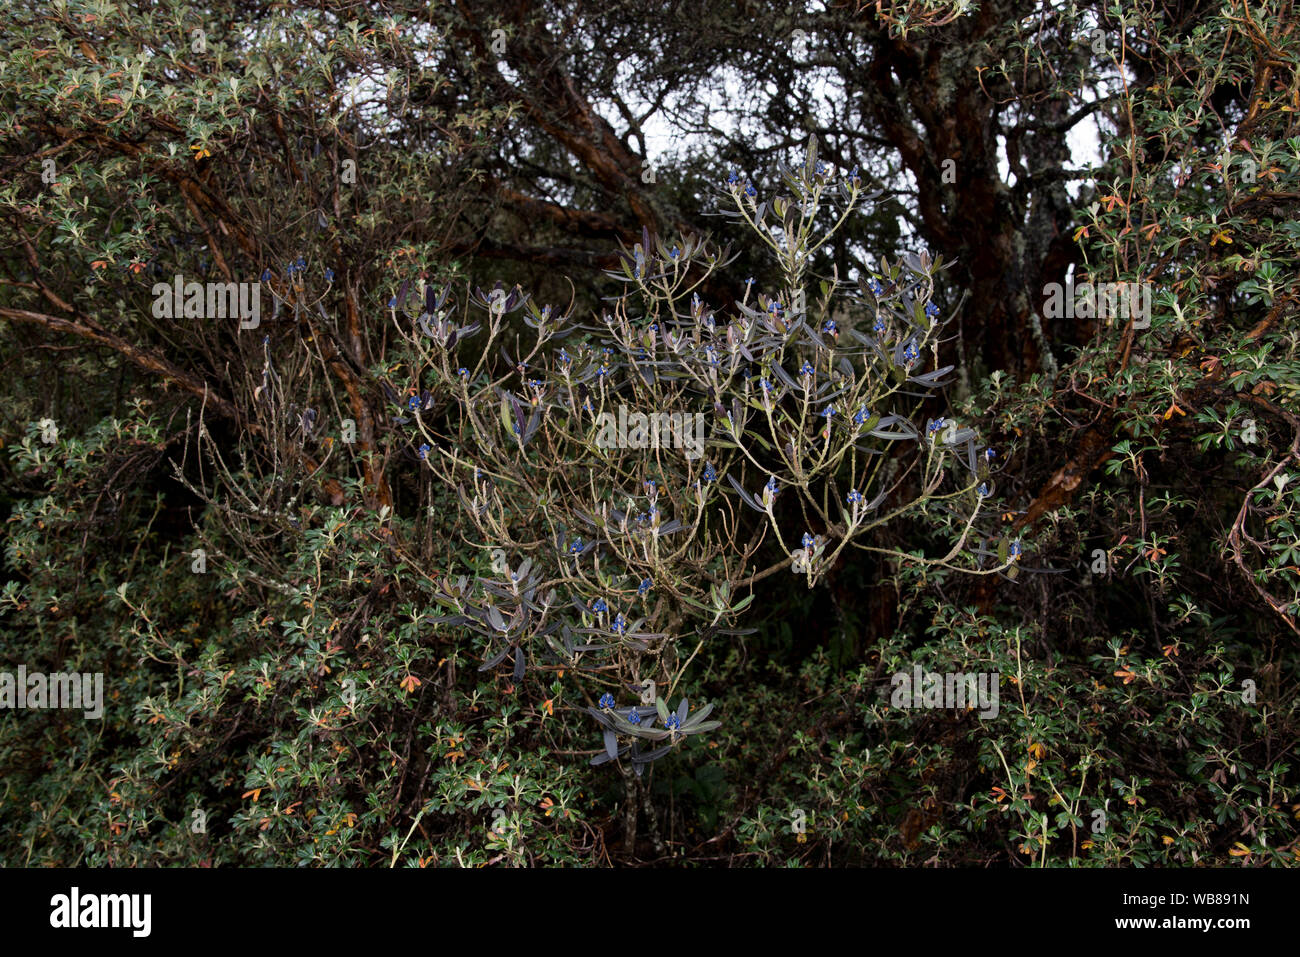 The Polylepis forest at 3850 meters  is one of very few remaining places with Polylepis trees in the highlands of the Andes in Ecuador. Stock Photo